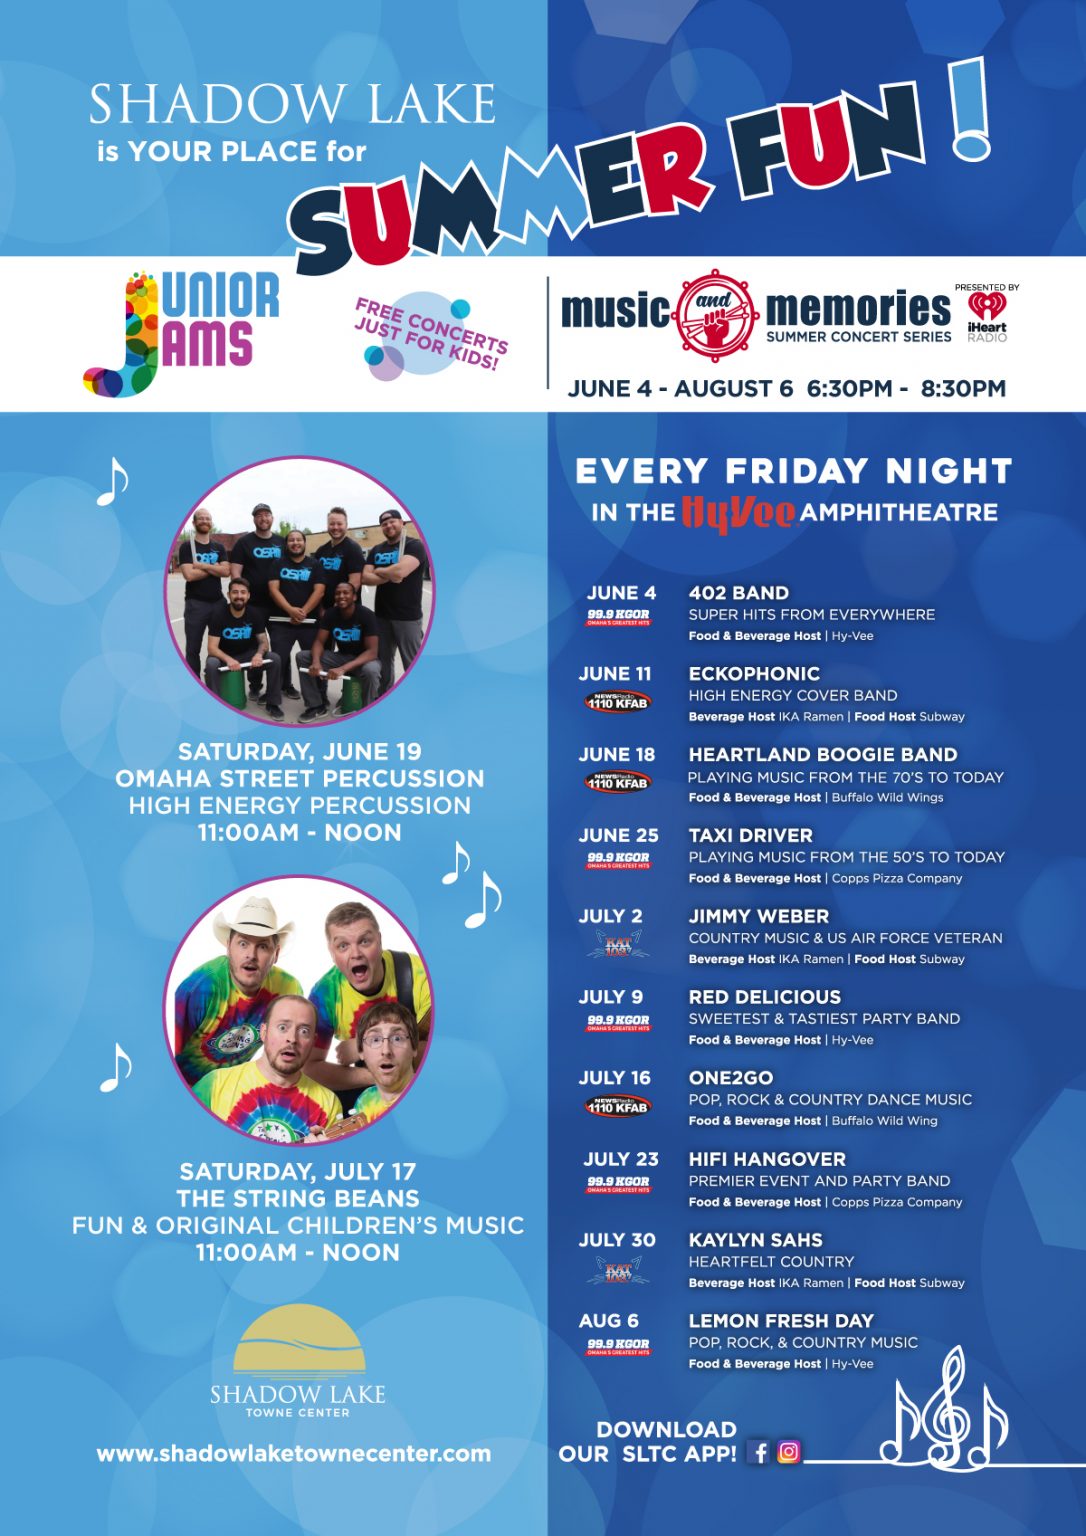 It’s Back!! Summer Concerts at Shadow Lake Towne Center Papillion